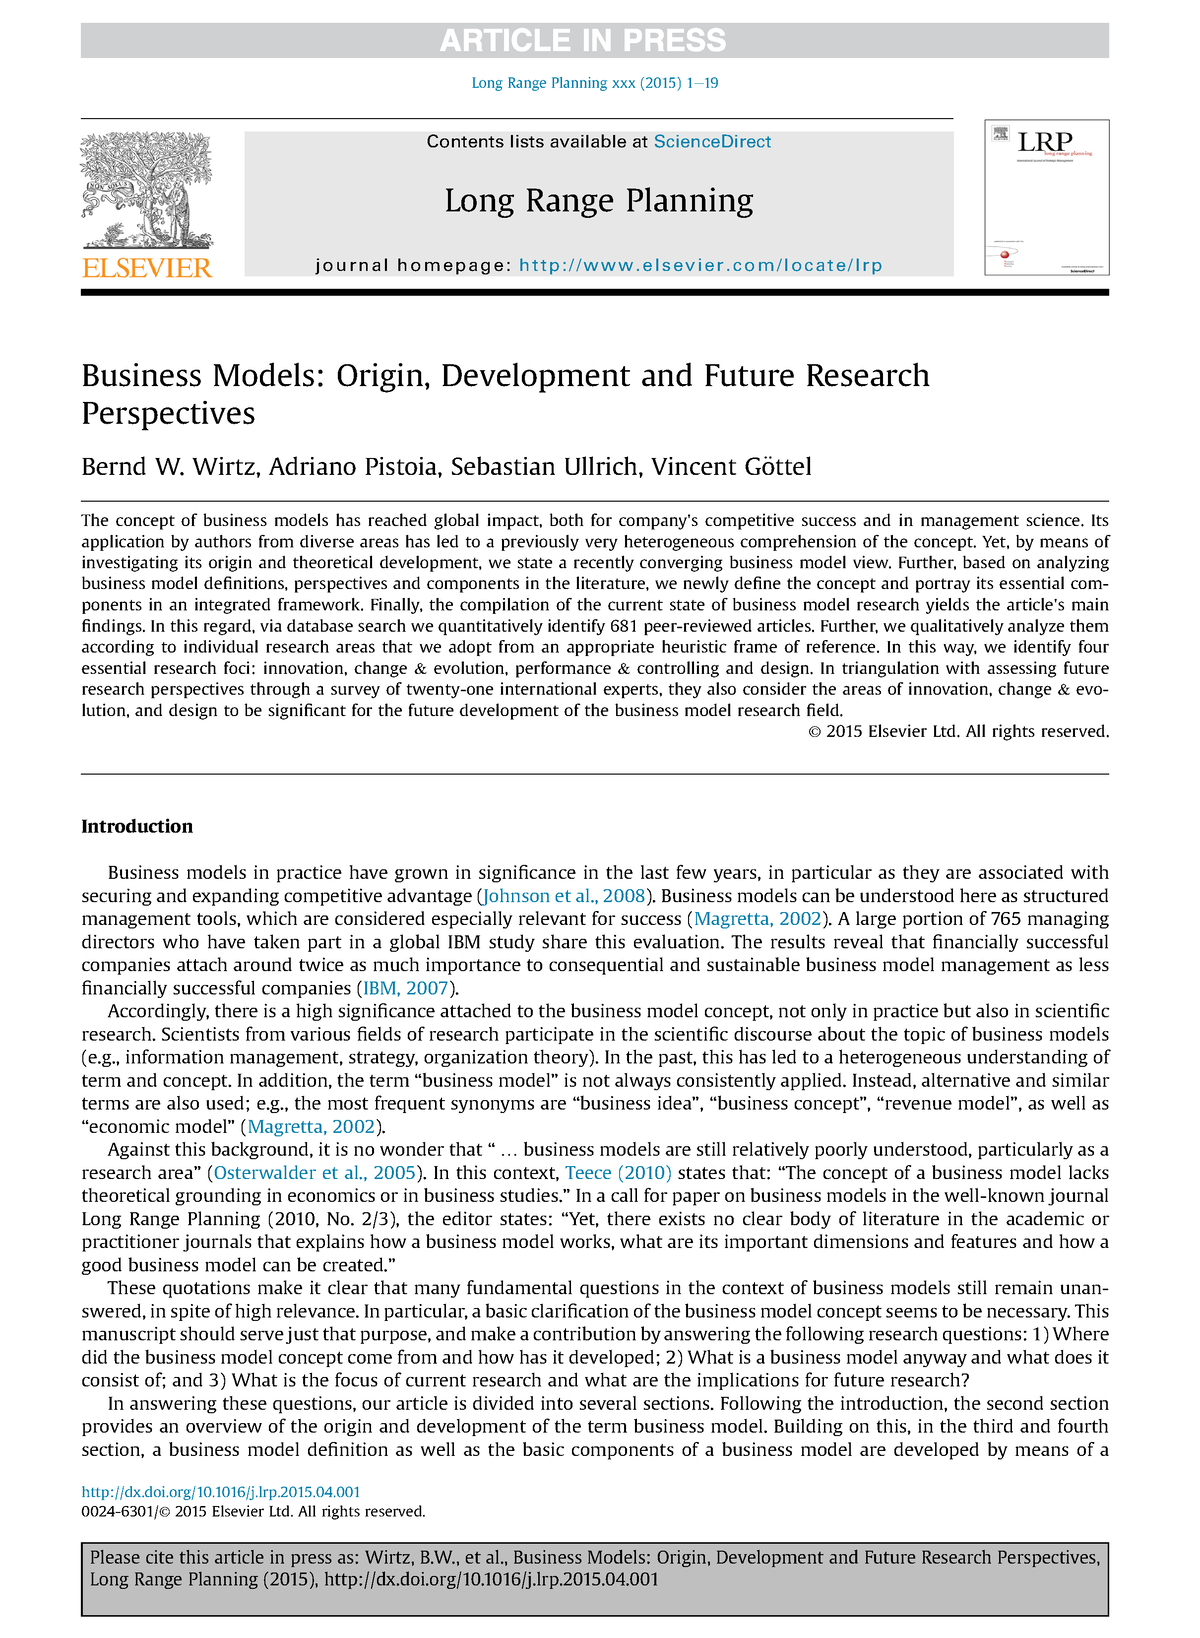 business models origin development and future research perspectives